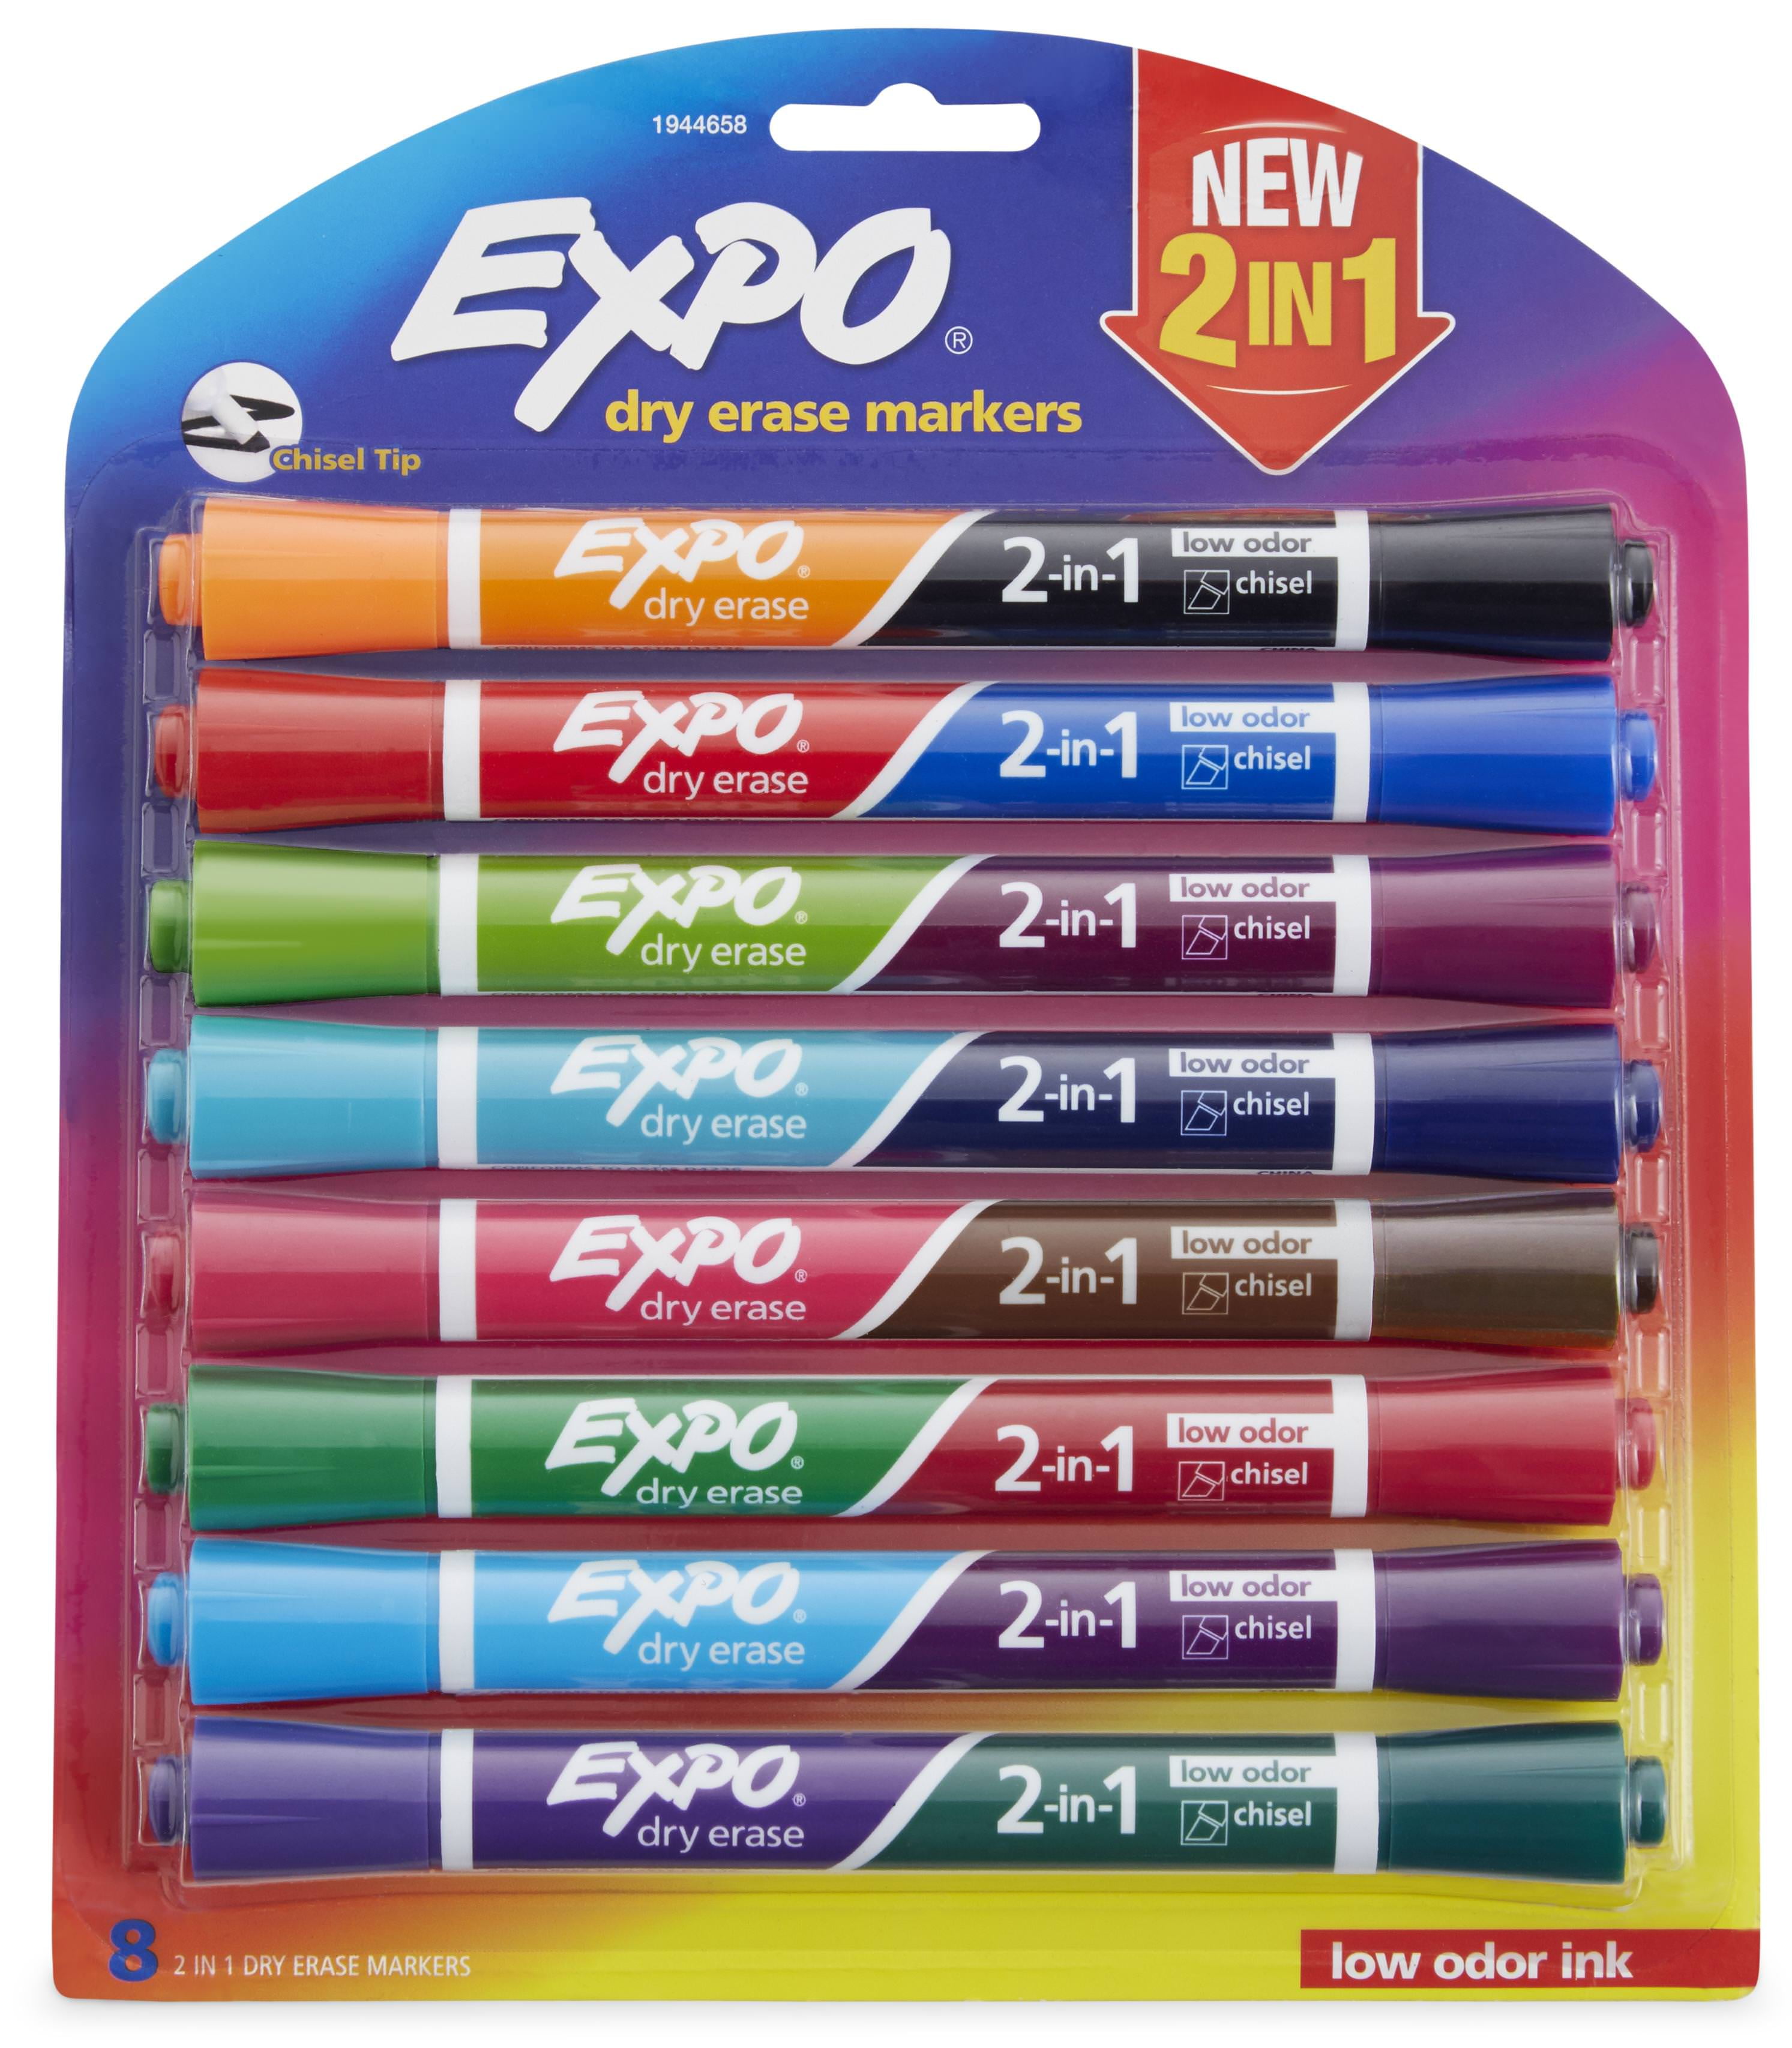 Chisel Tip, Expo 2 Low Odor Dry Erase Markers Whiteboard Marker 8000 